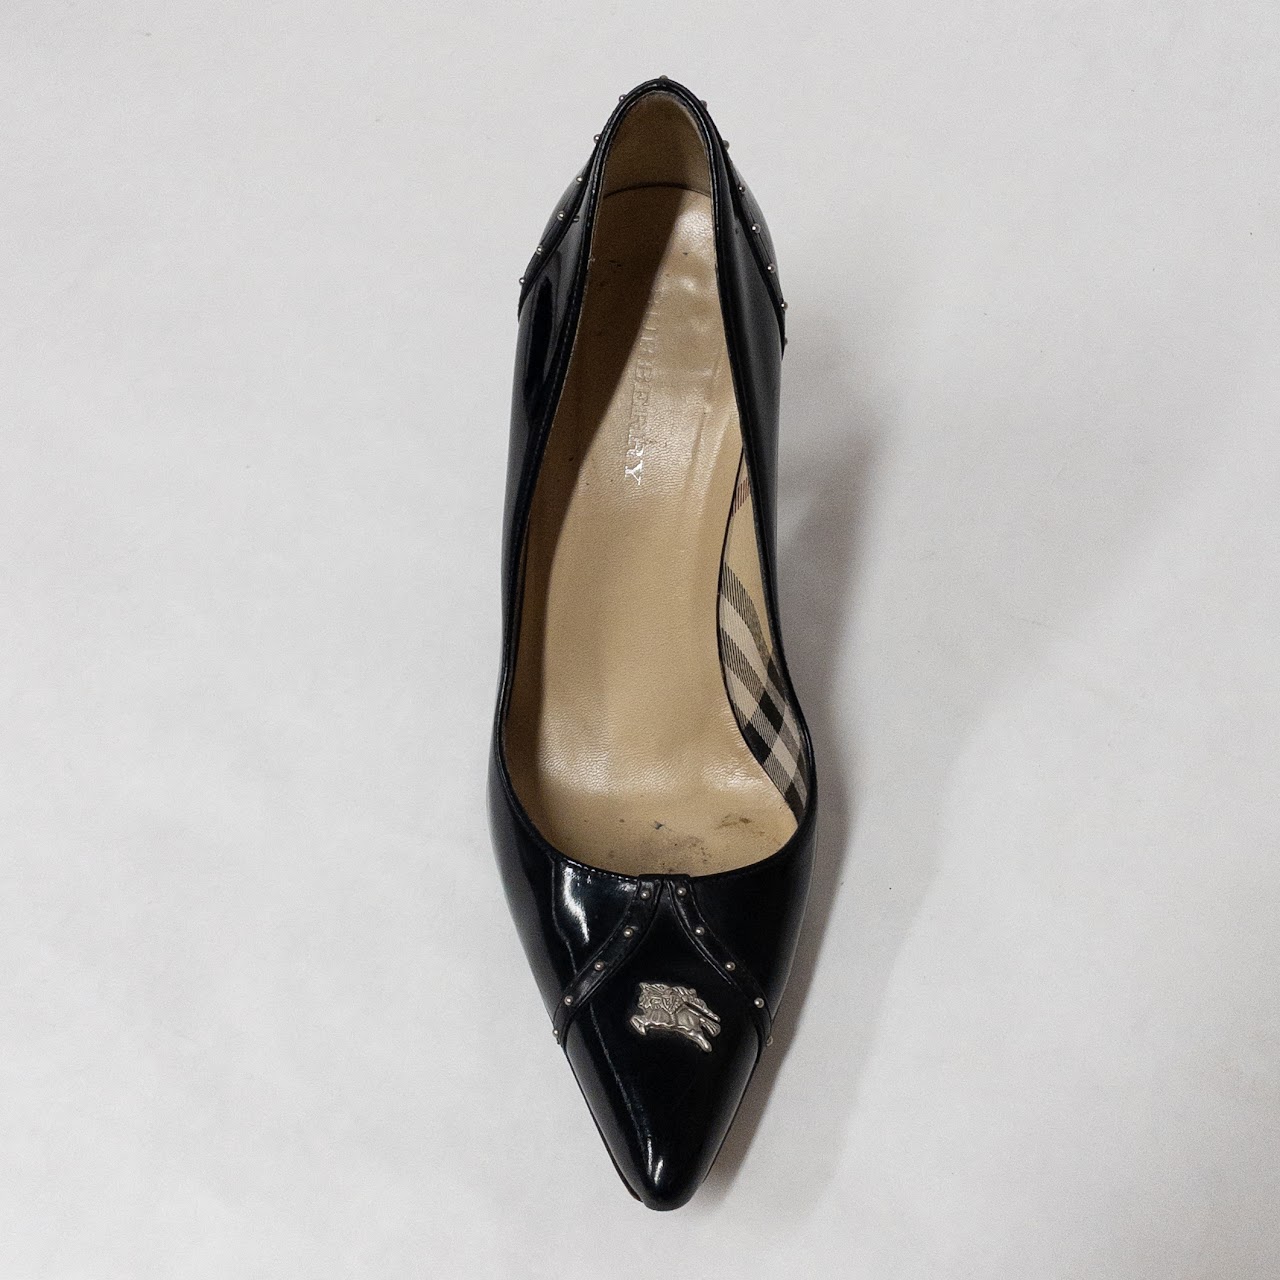 Burberry Patent Leather Pumps